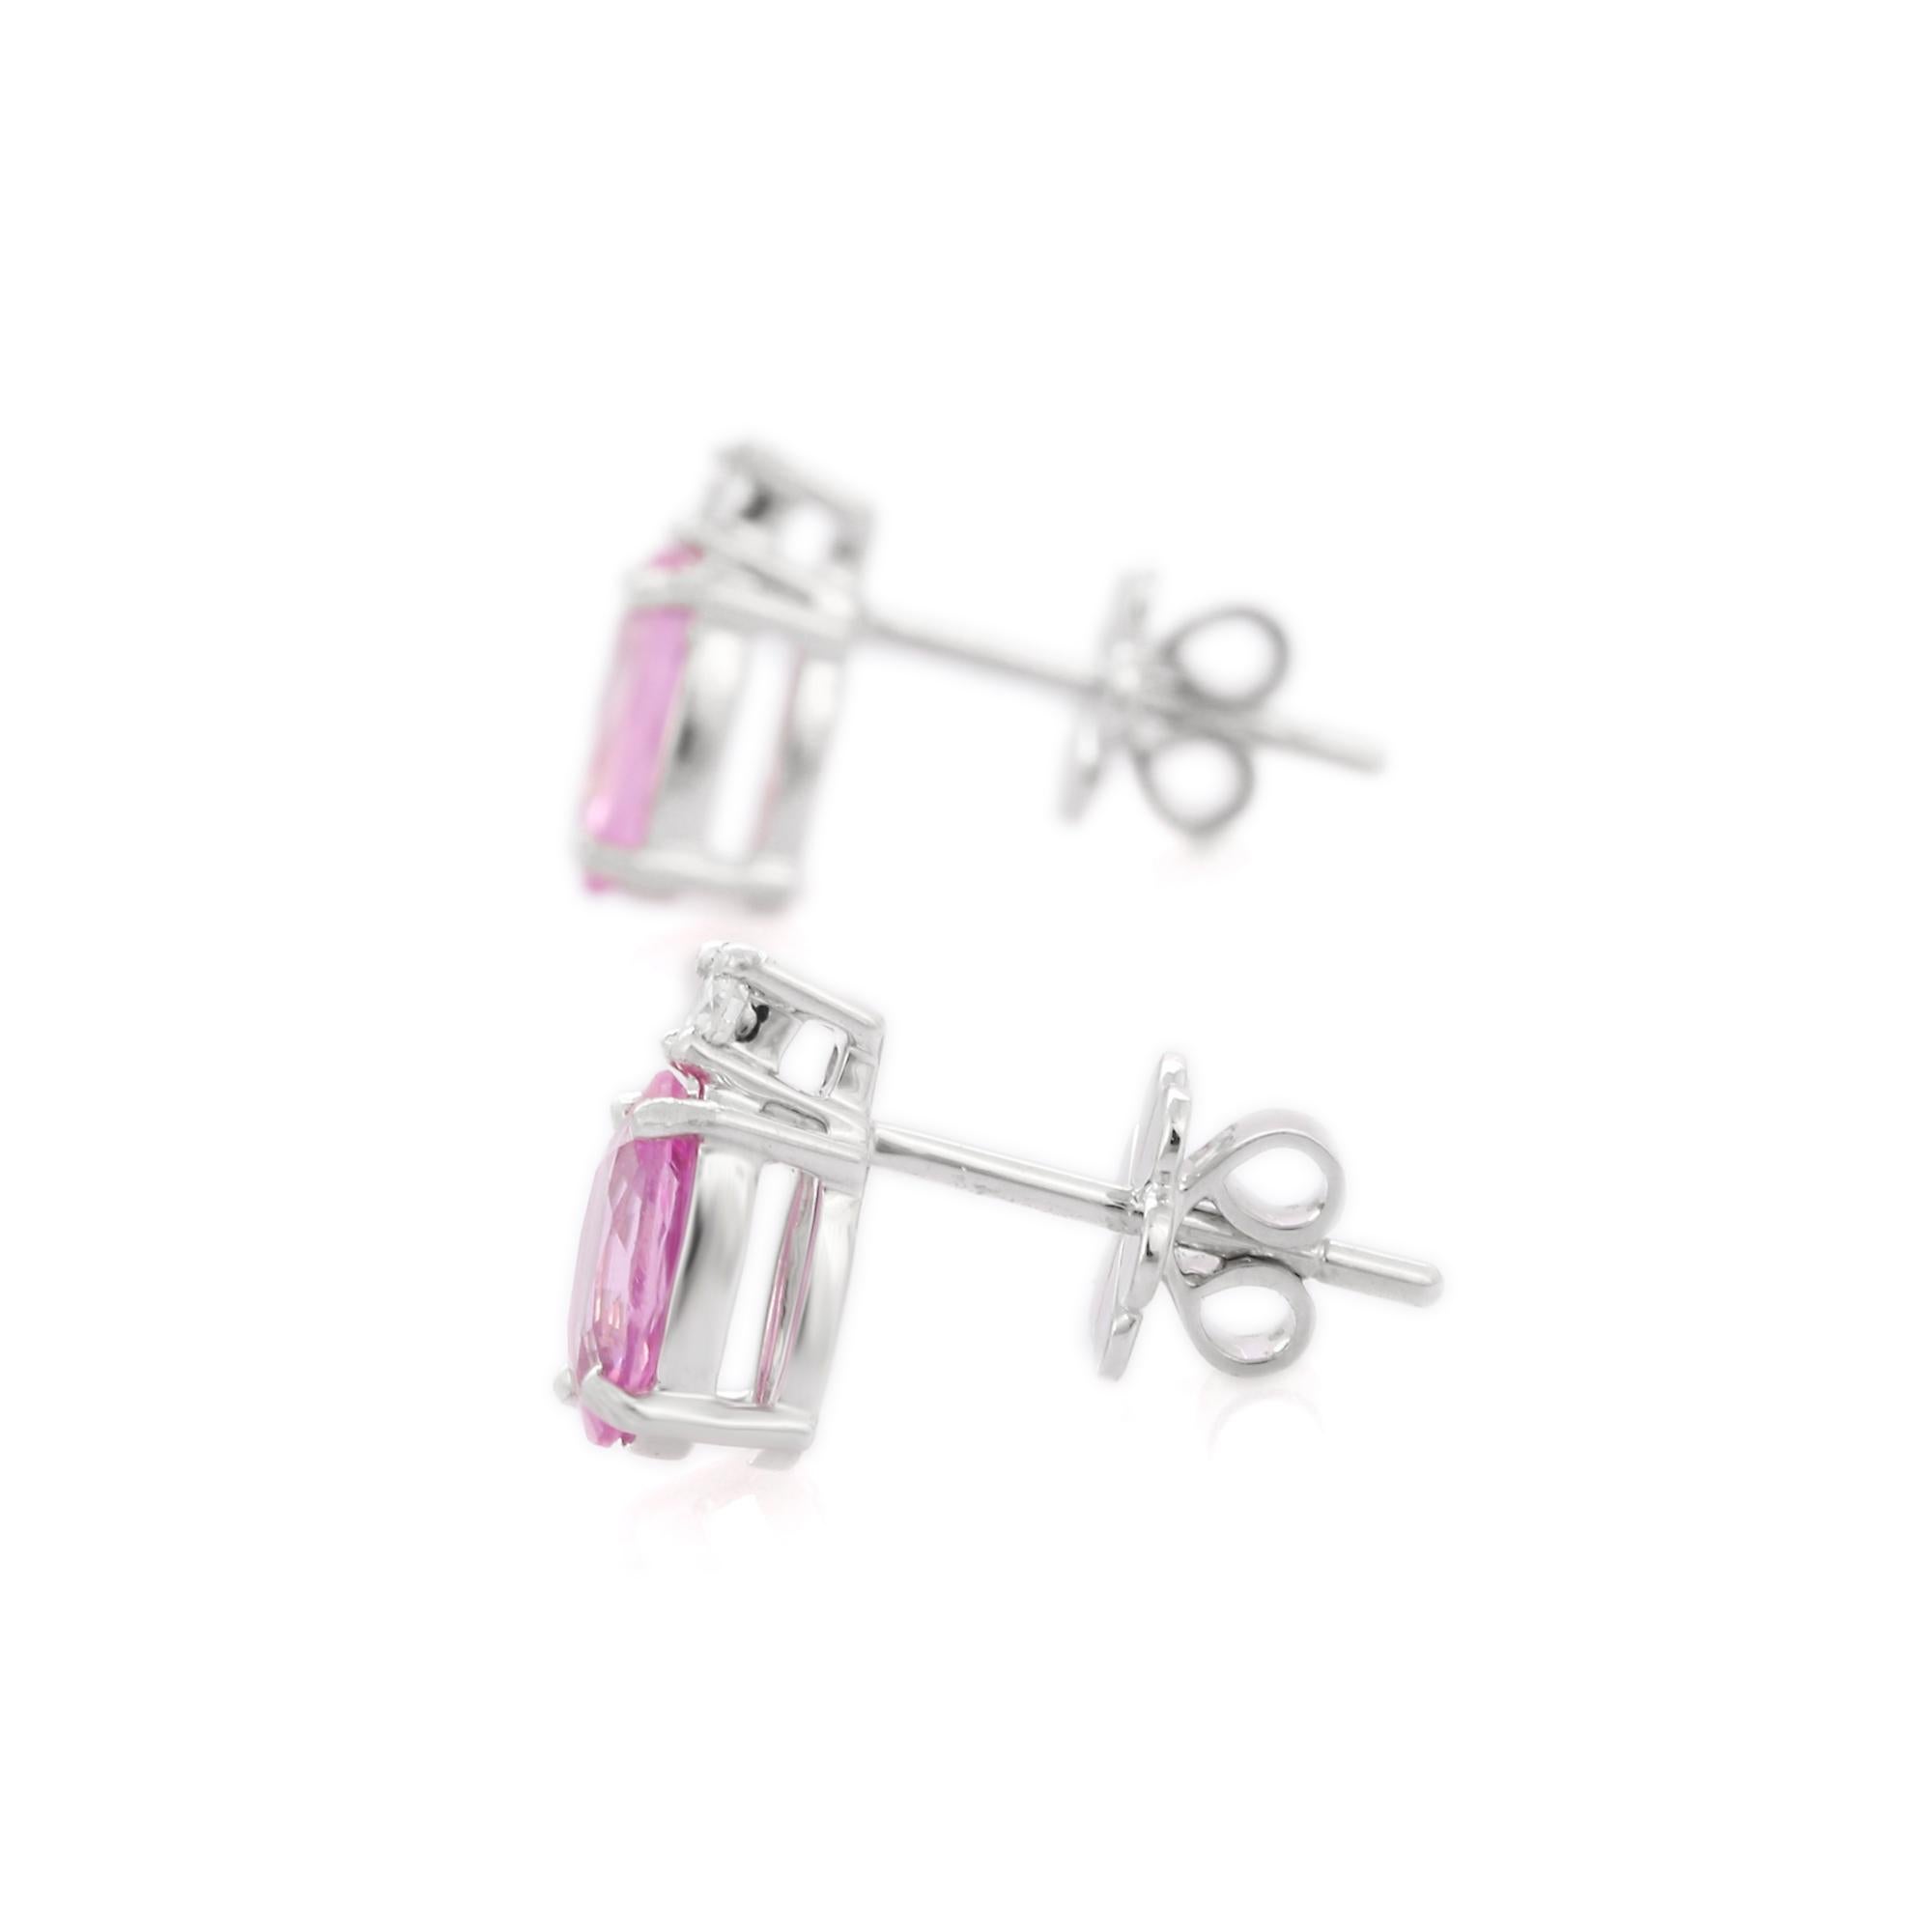 Oval Cut 1.48 Carat Prong Set Pink Sapphire Diamond Stud Earrings in 18K Solid White Gold For Sale